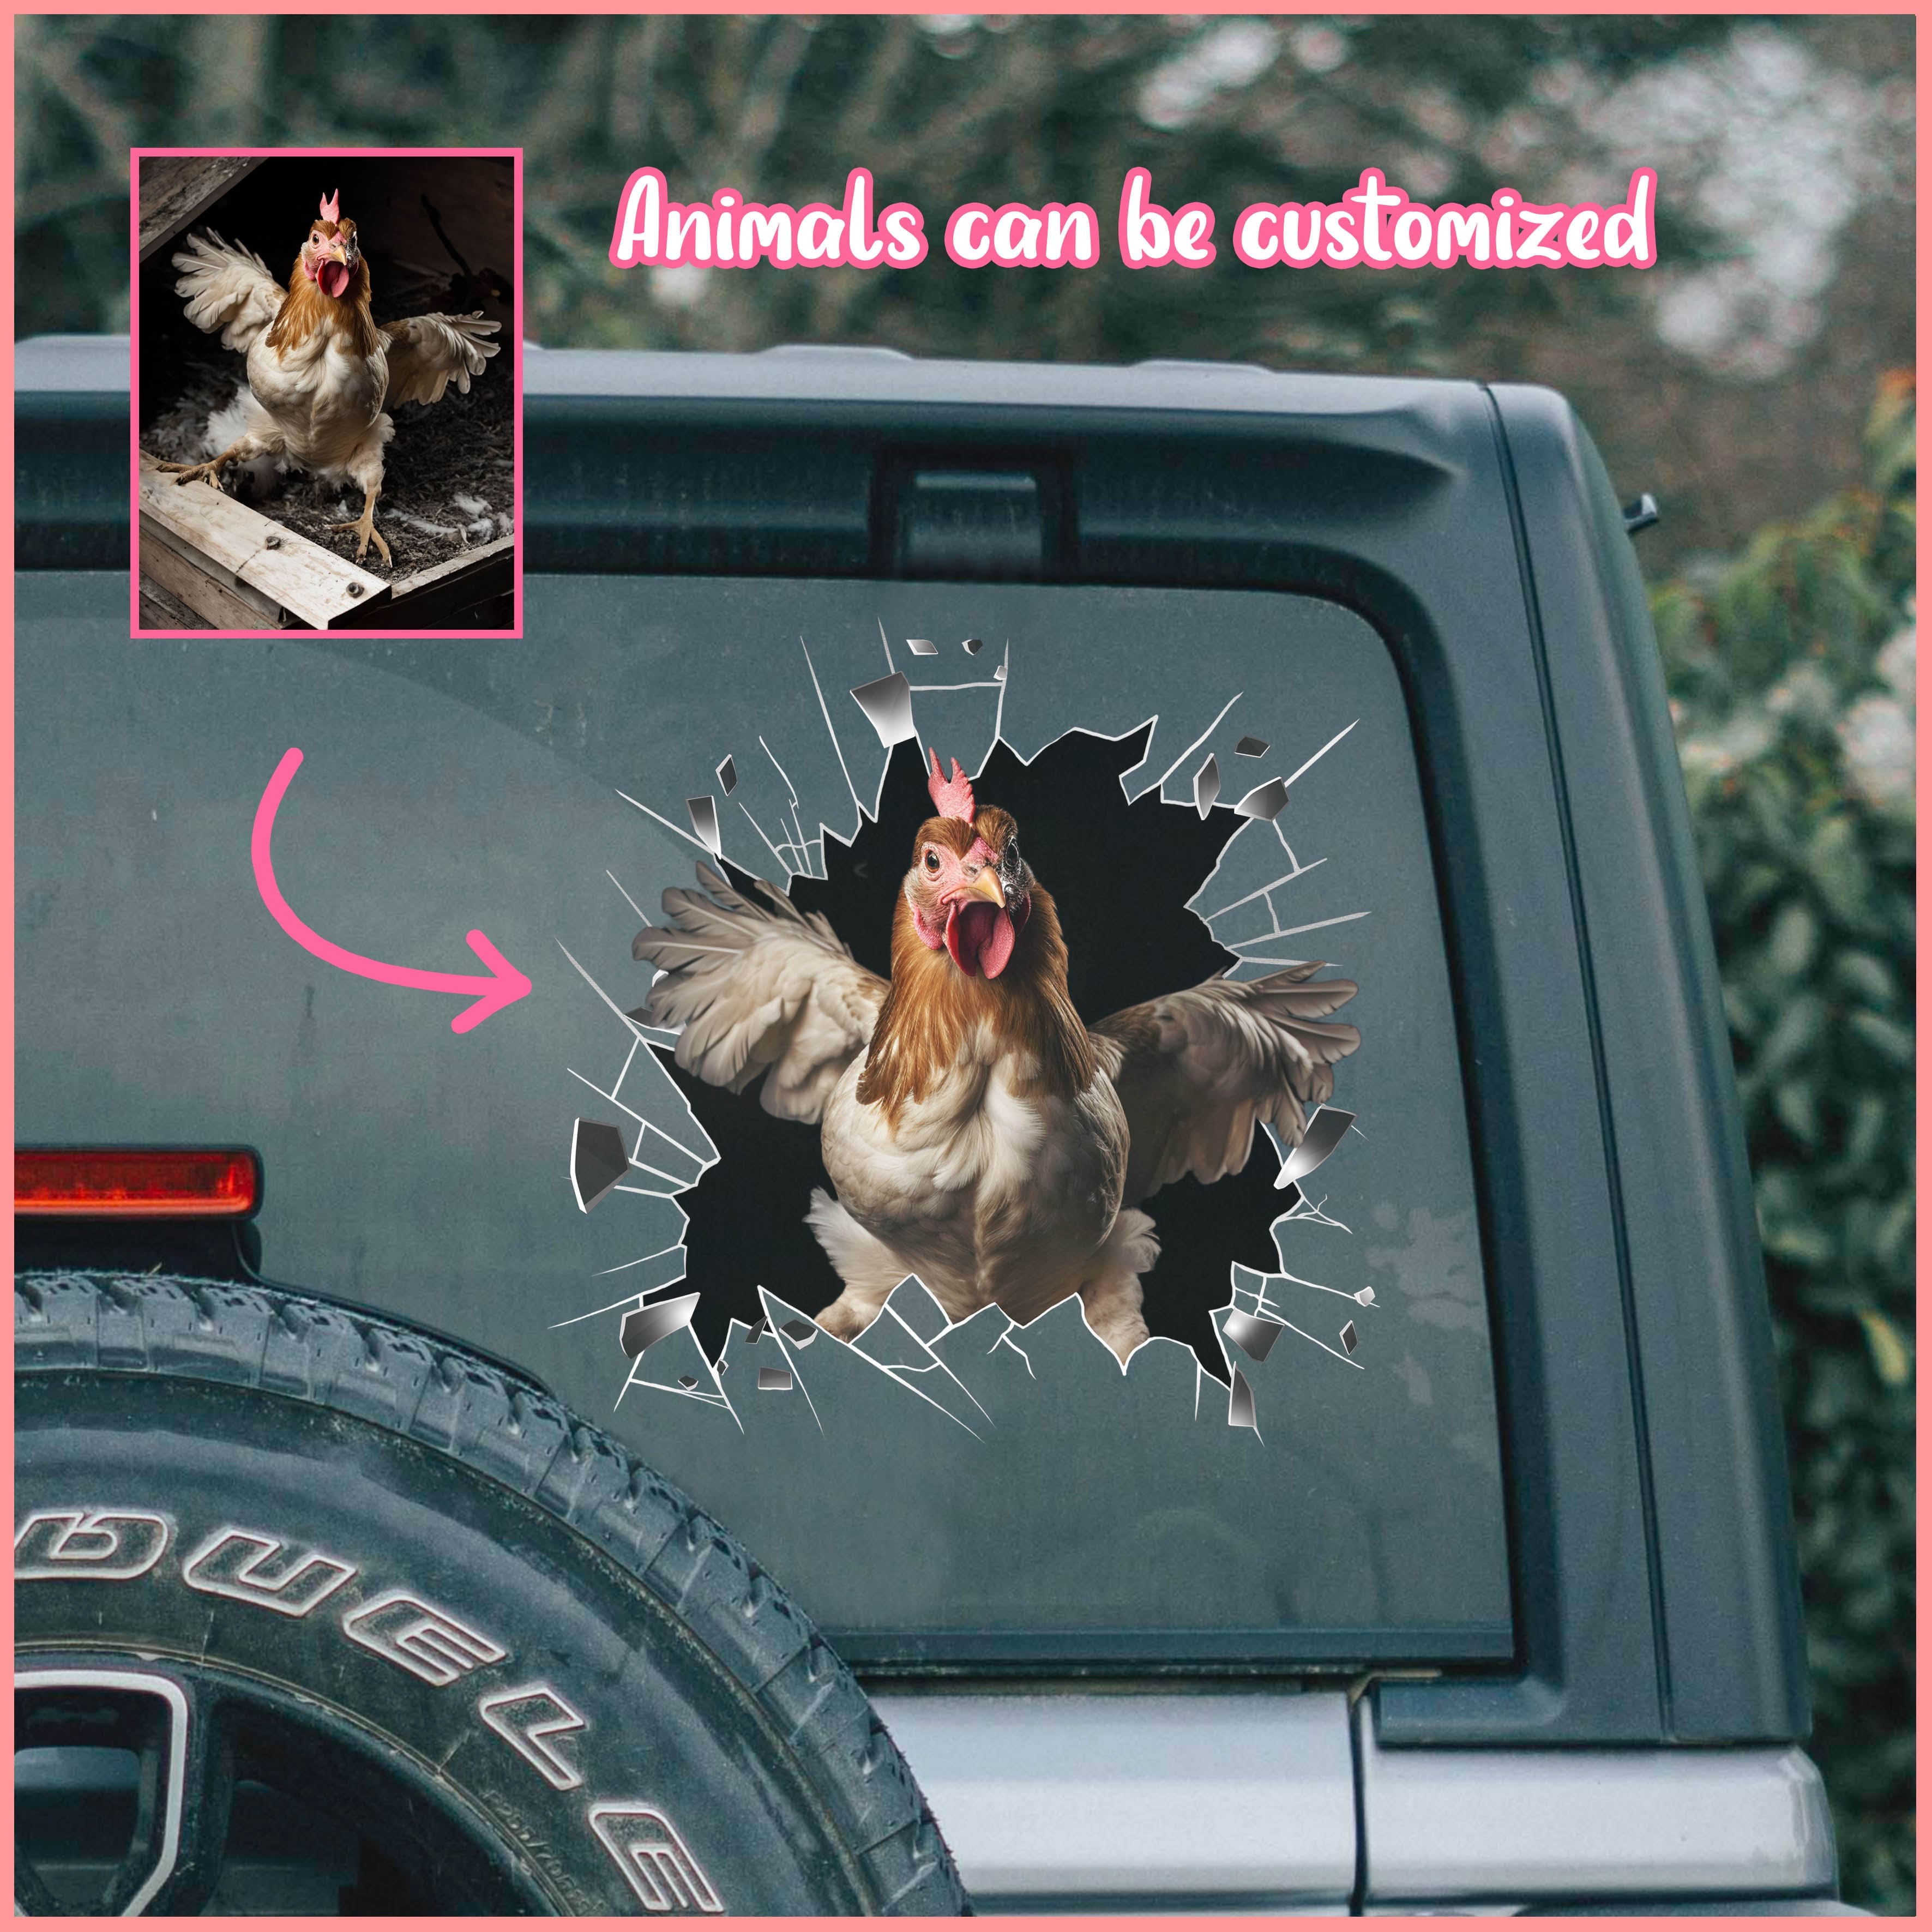 Chicken car decal, Animals can be customized